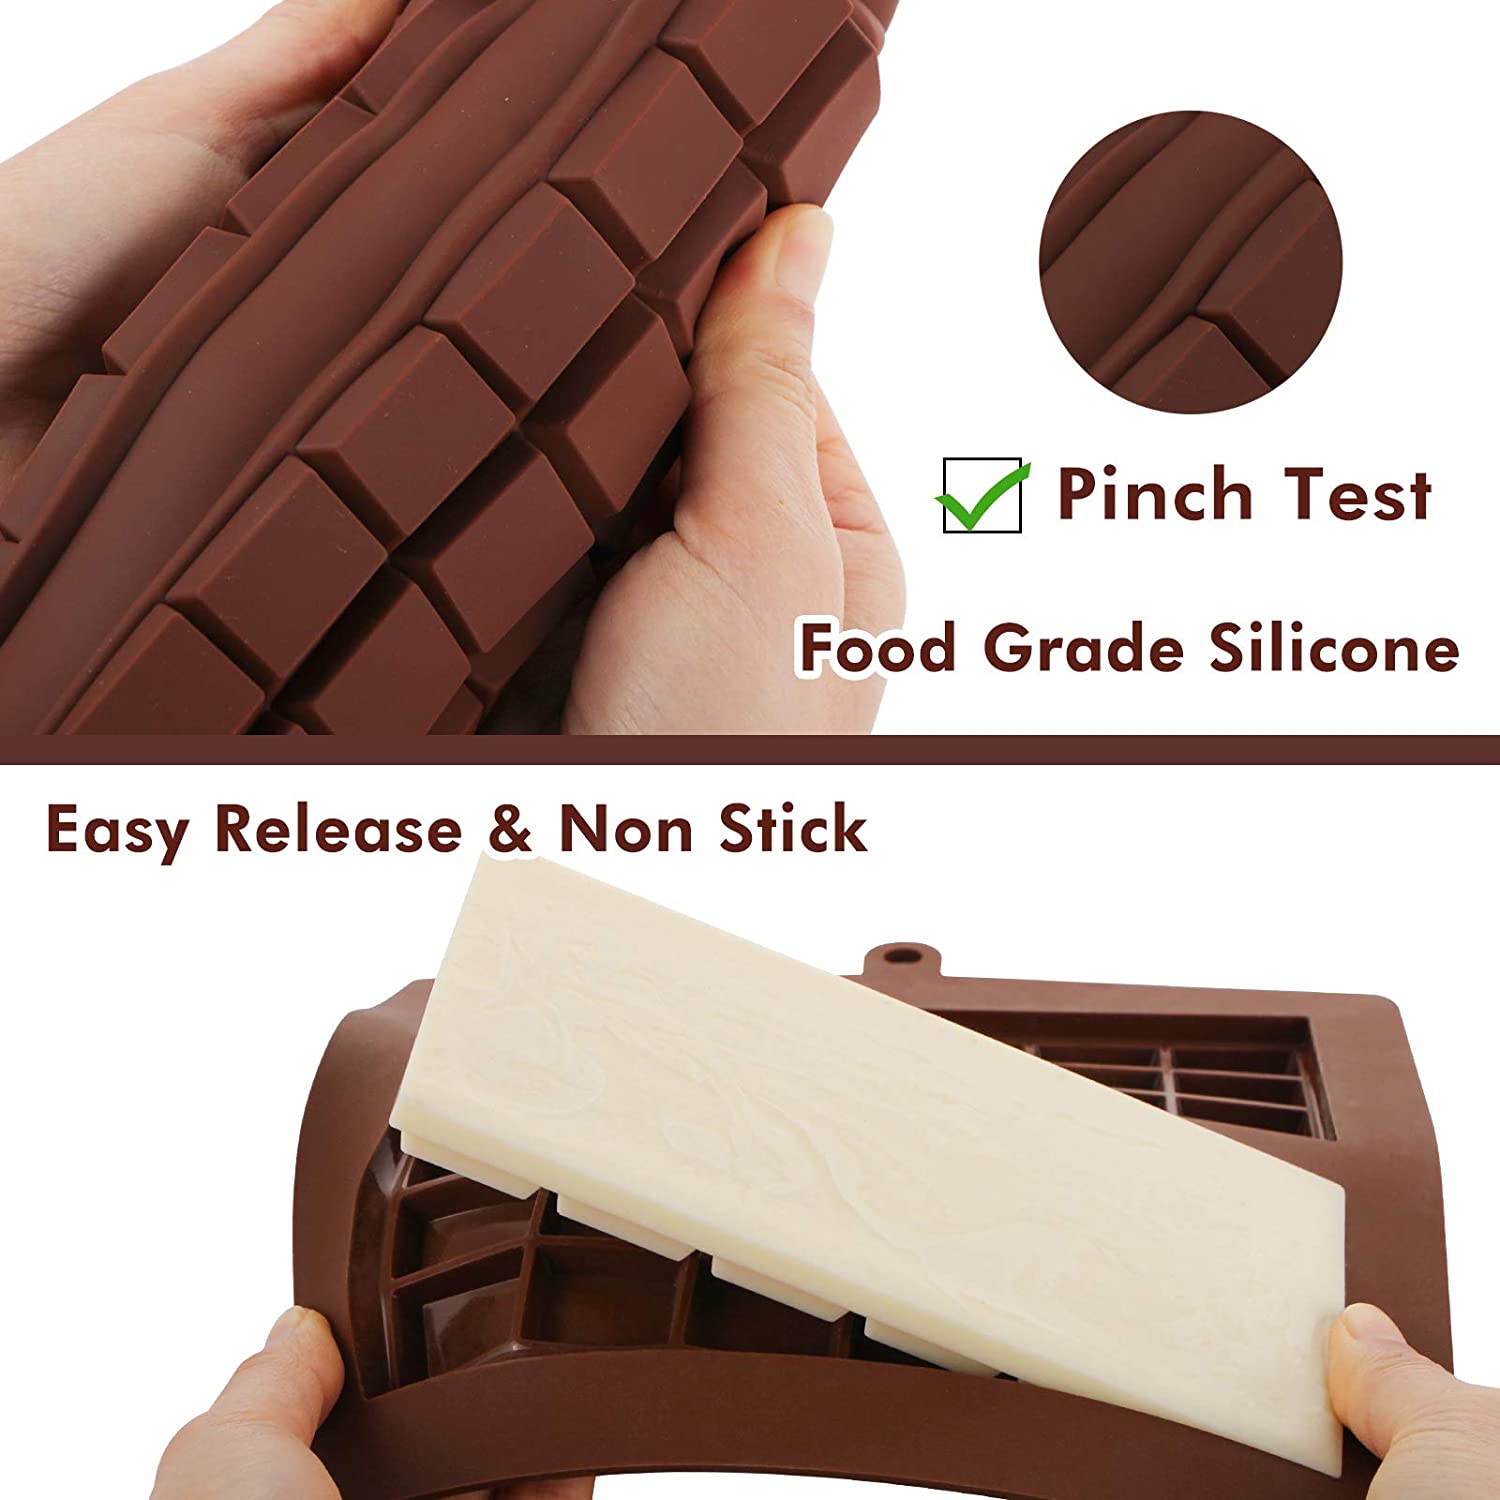 Webake 2-Pack Silicone Chocolate Molds, Candy Molds, Mold for Chocolate,Keto